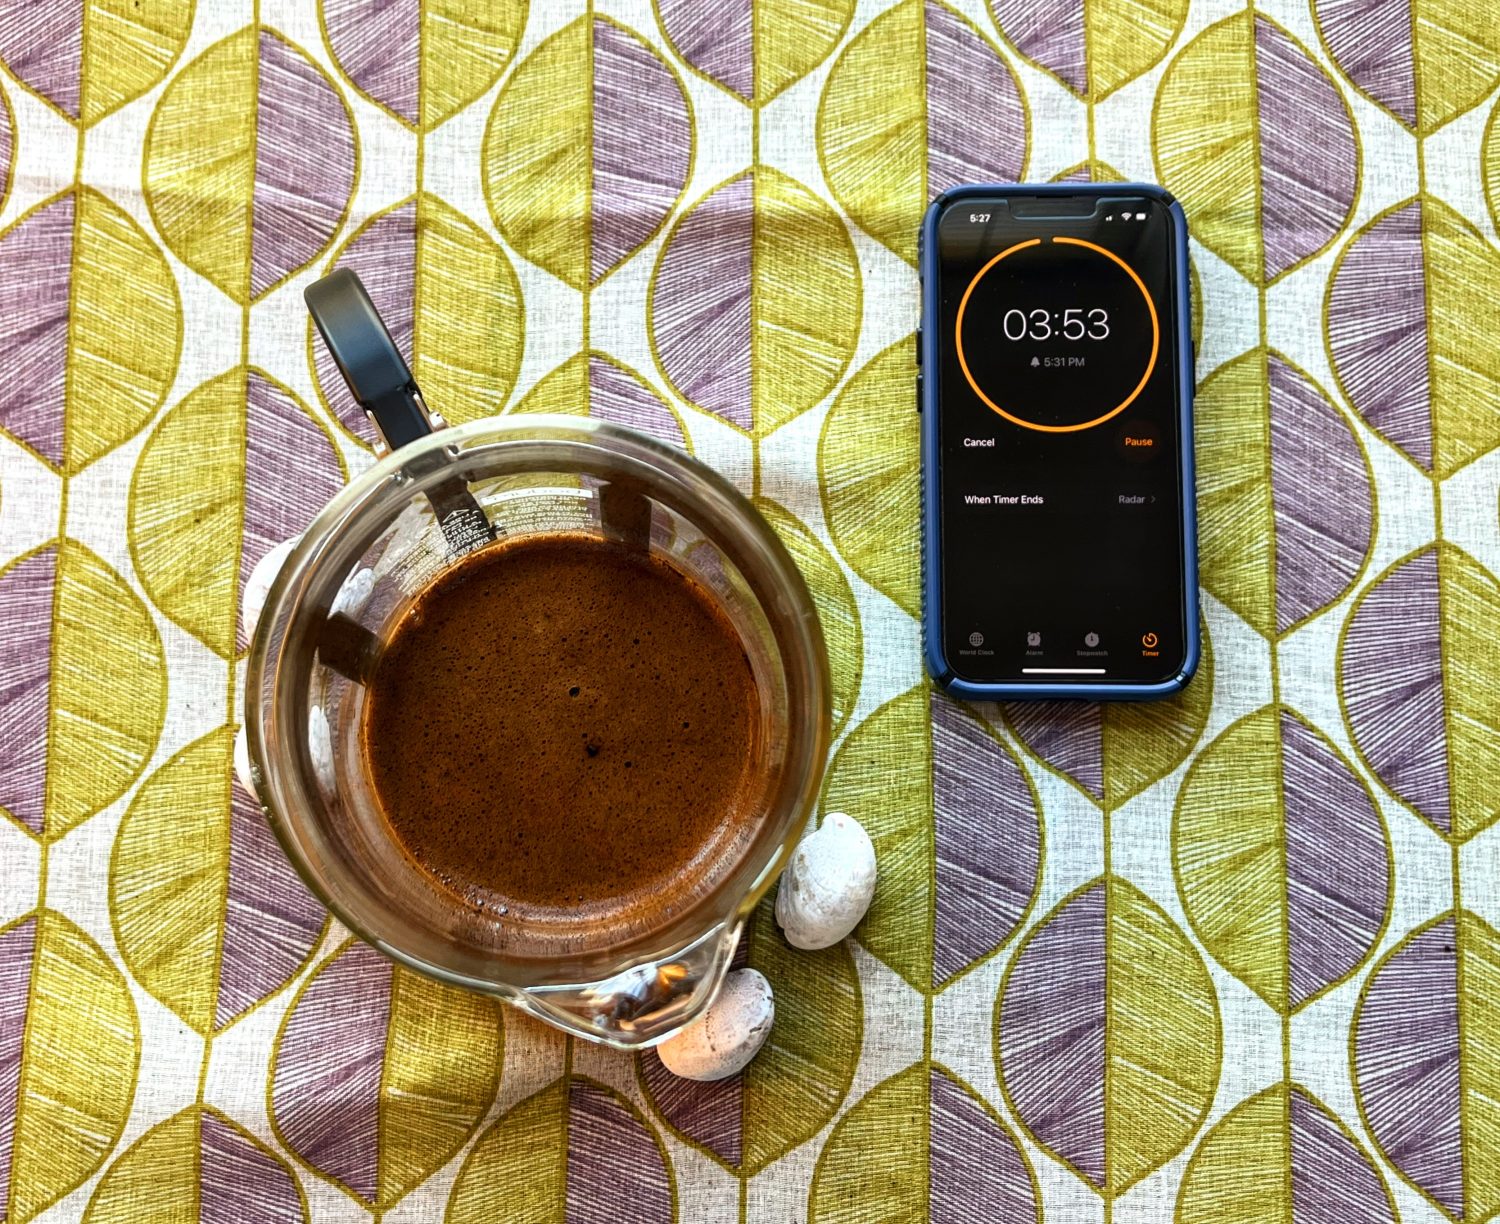 french-press-coffee-steeping-next-to-phone-timer